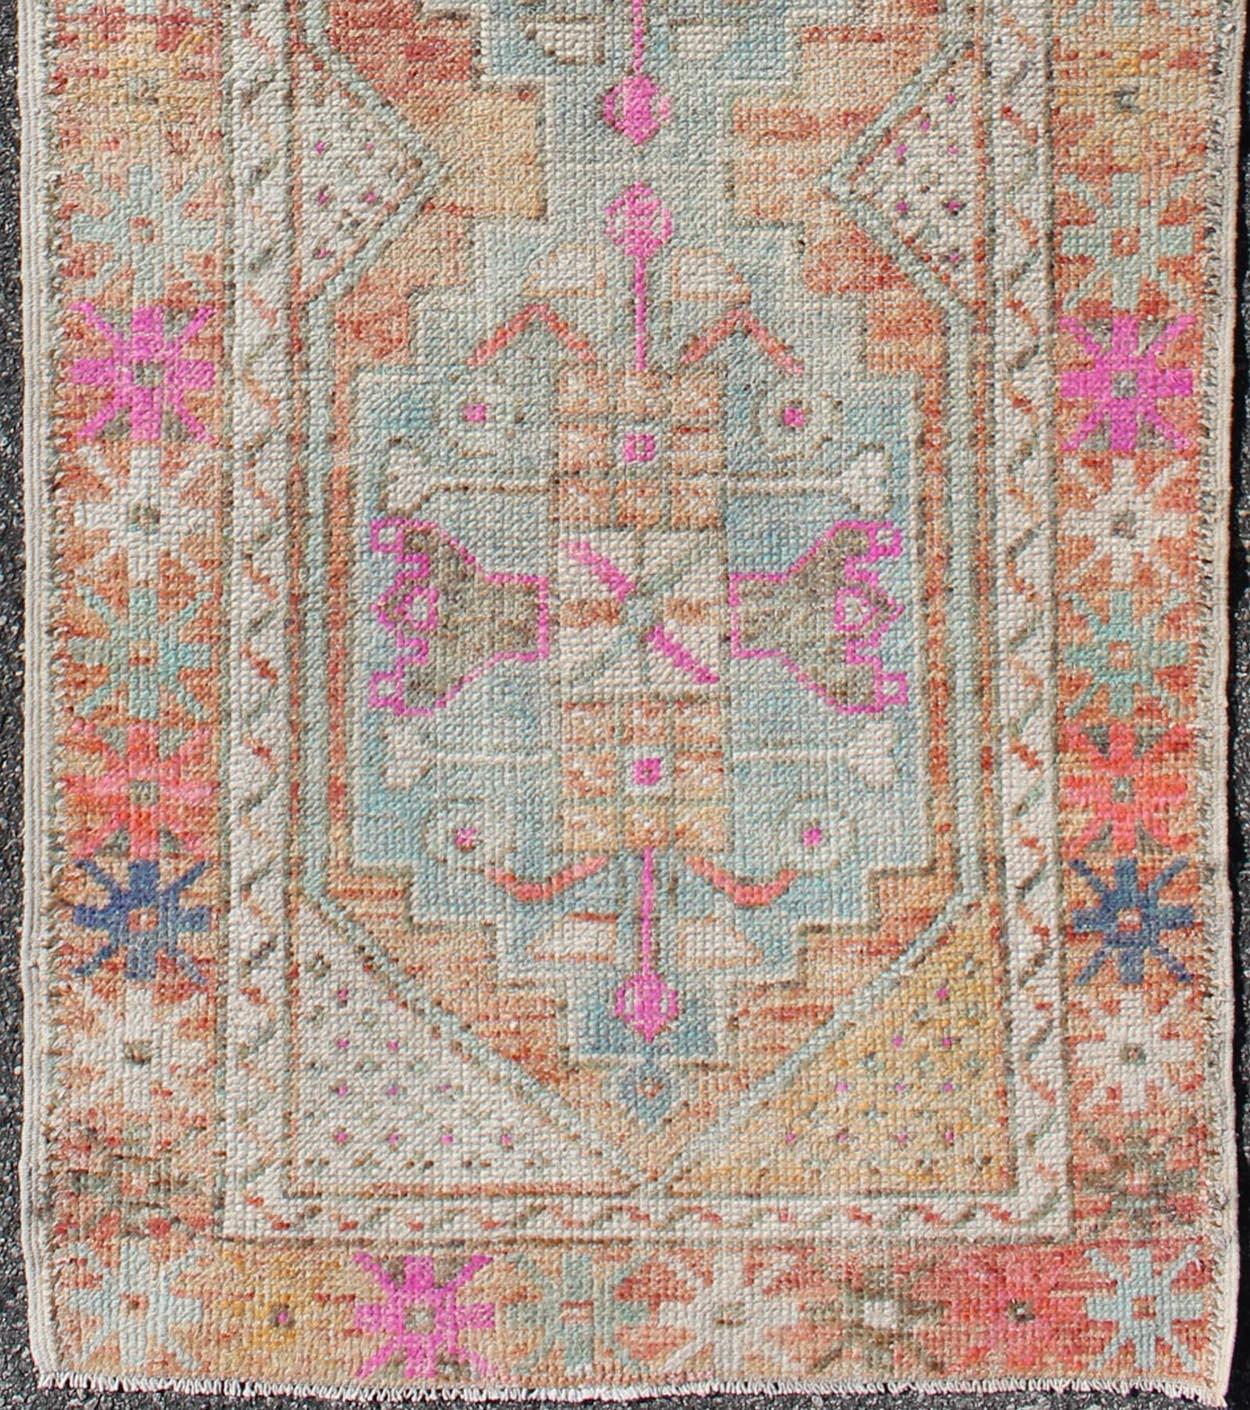 Oushak vintage rug from Turkey with multicolored Medallion design, colors include Orange, Purple/lavender, pink, green, light blue rug en-165996, country of origin / type: Turkey / Oushak, circa 1930

This vintage Turkish Oushak rug features a